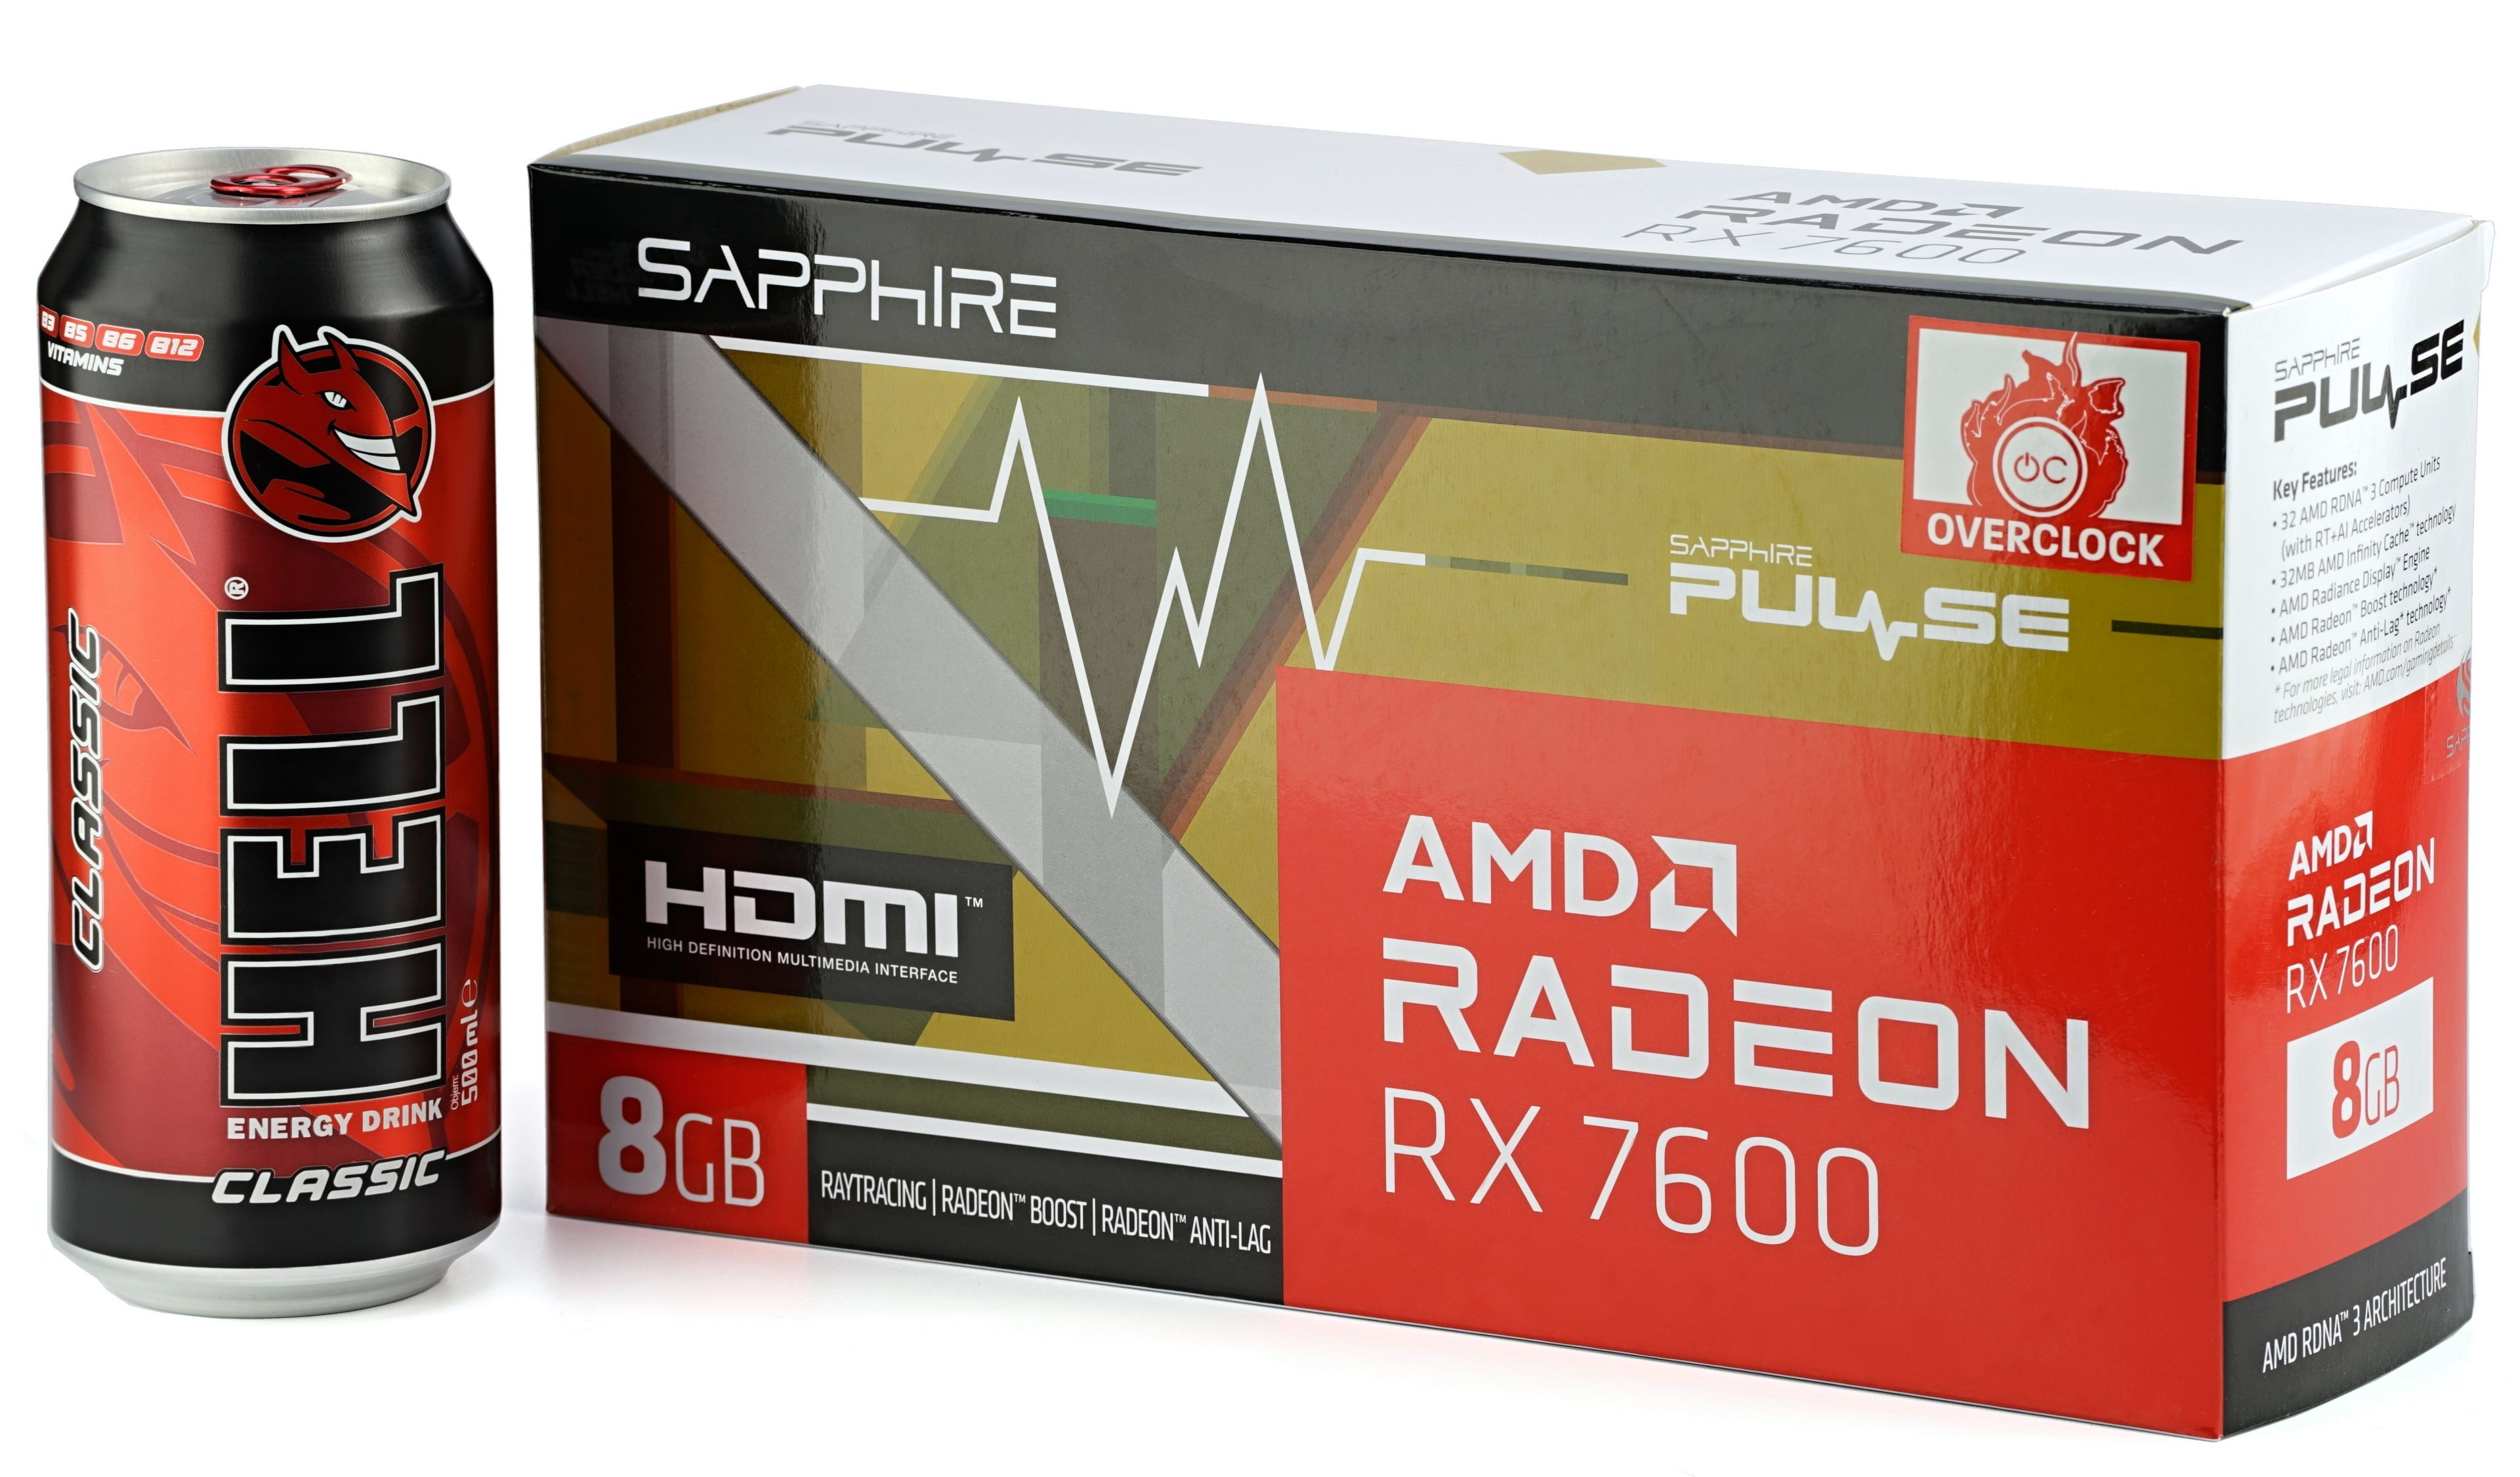 AMD Forces a Price Increase: Radeon RX 6650 XT Review  Last night we took  a look at the refreshed Radeon 6600 XT, the 6650 XT. Here is an opinionated  benchmark review.